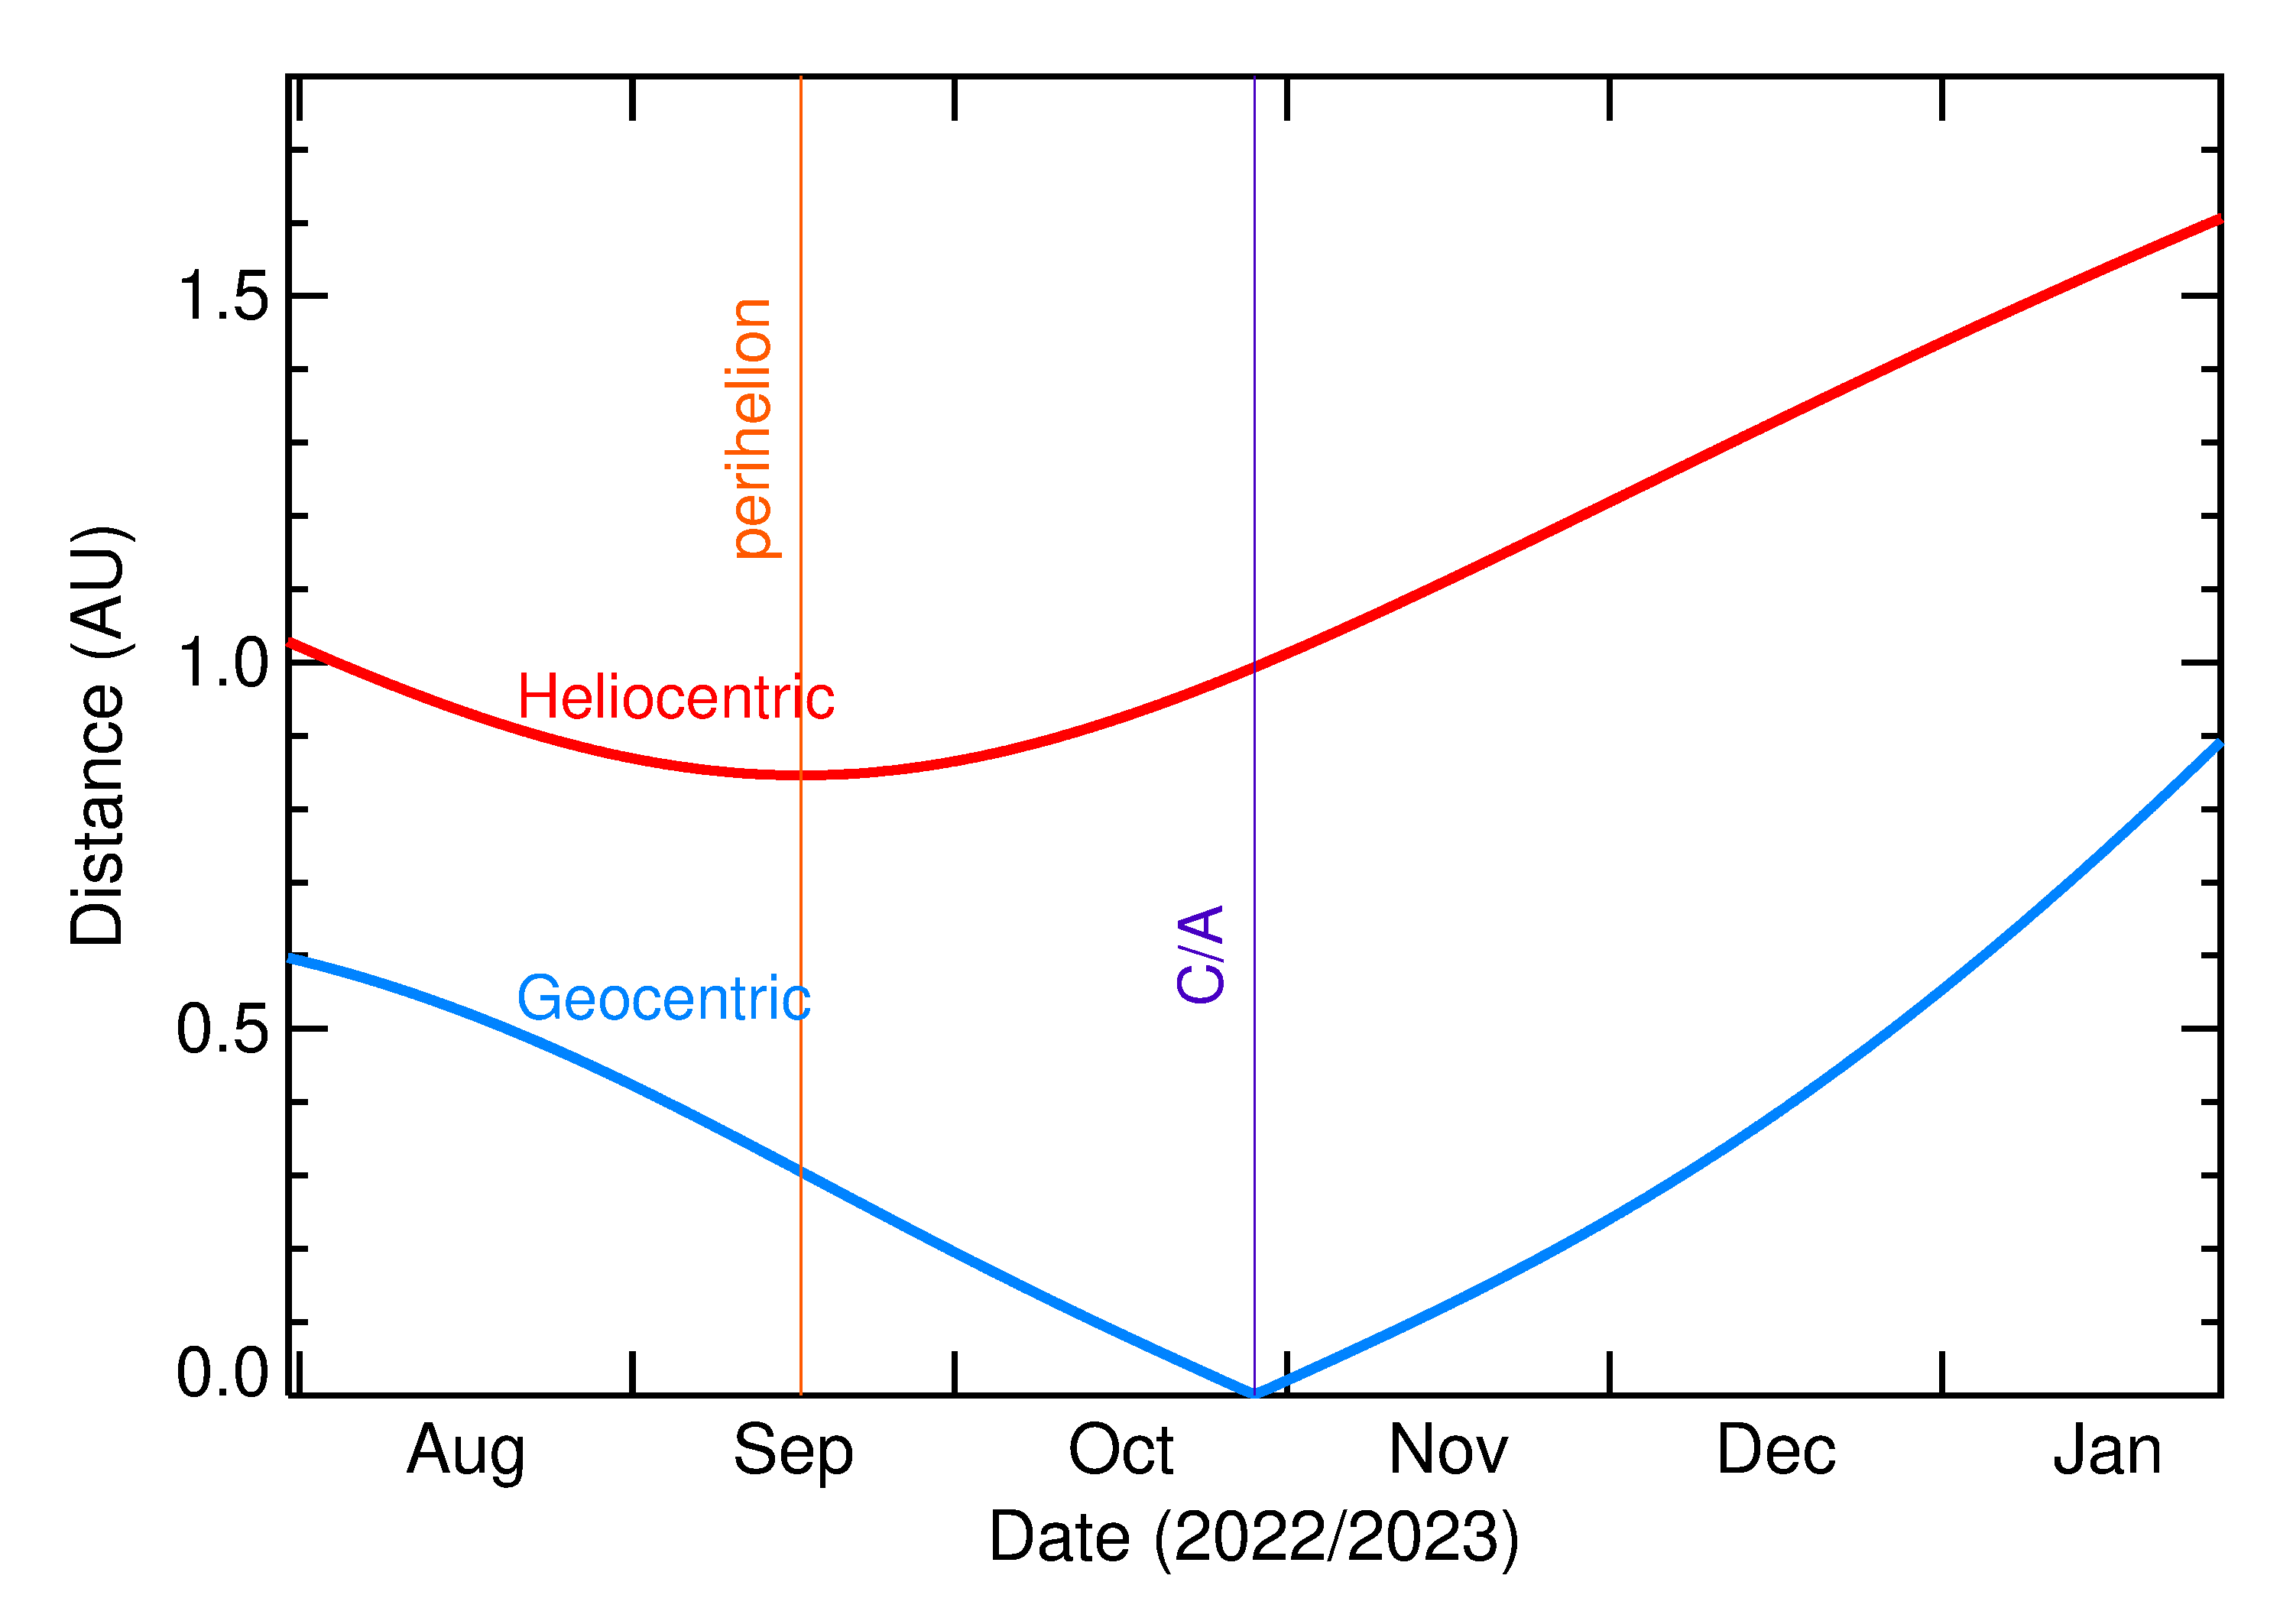 Heliocentric and Geocentric Distances of 2022 UA14 in the months around closest approach